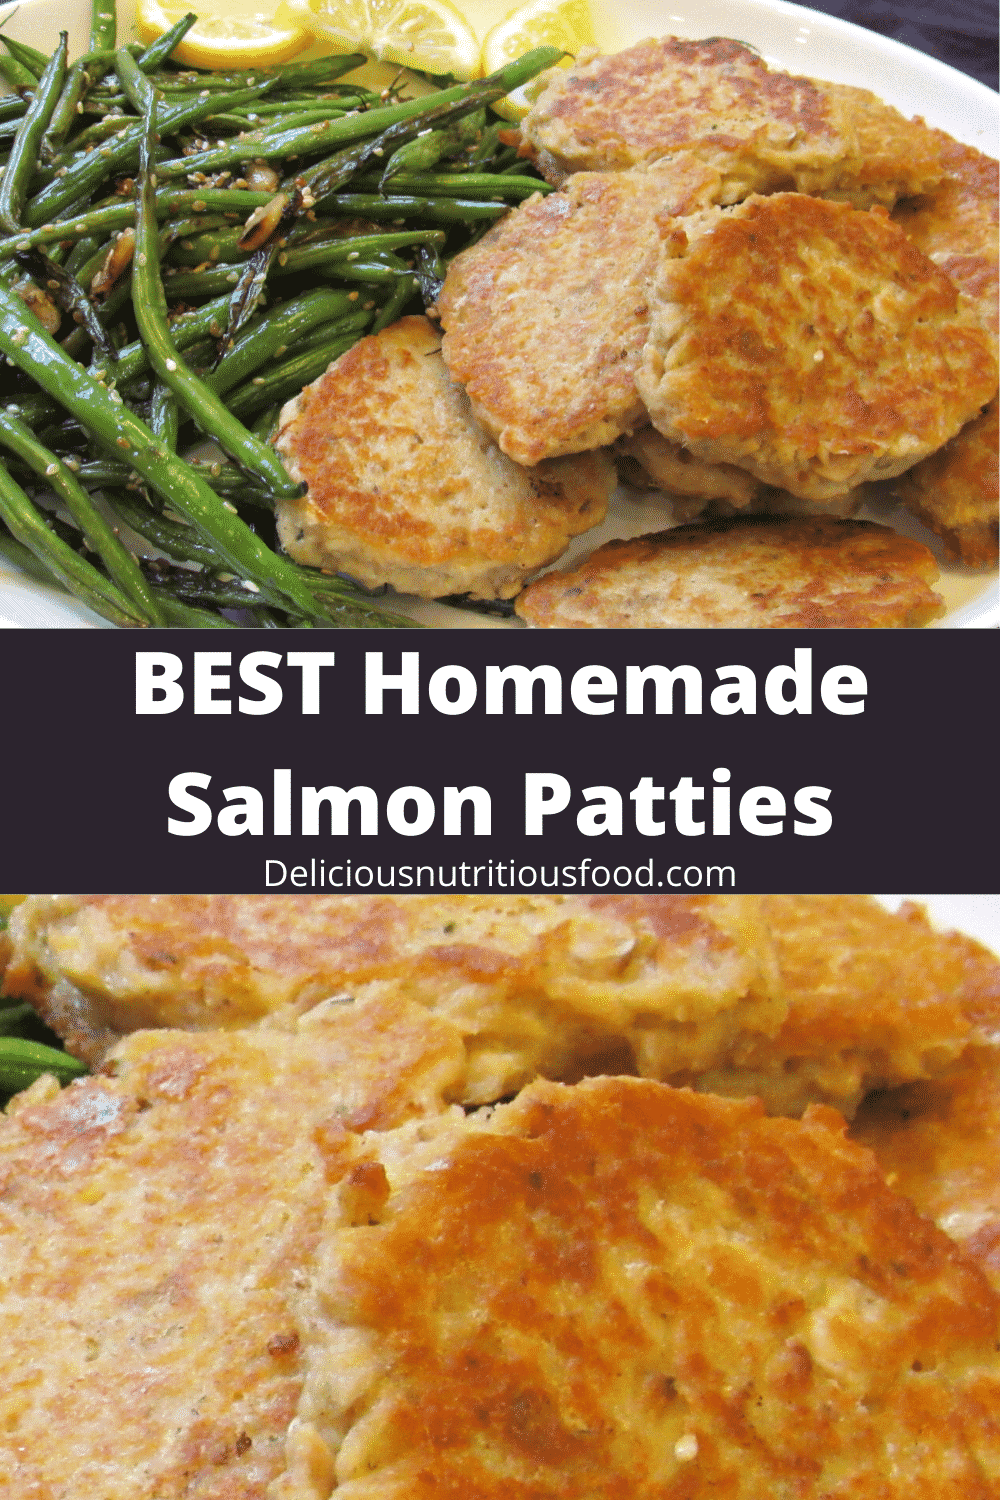 Old fashioned salmon patties are served with green beans on a white platter.